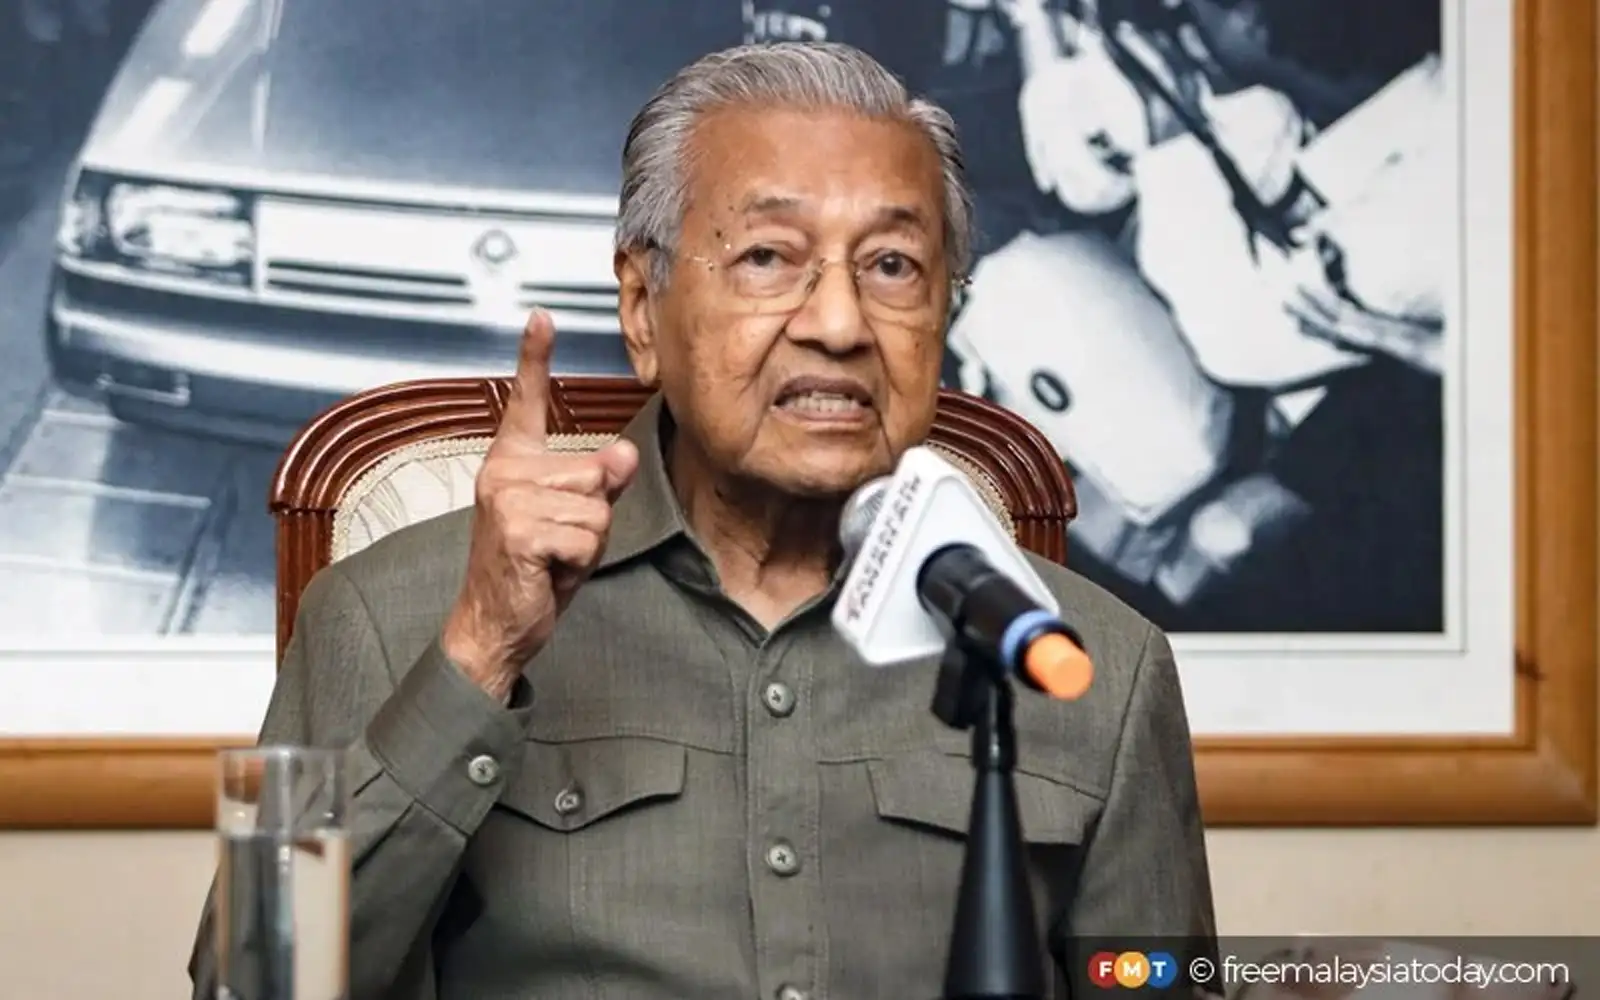 govt using the law to ‘threaten the people’, laments dr m